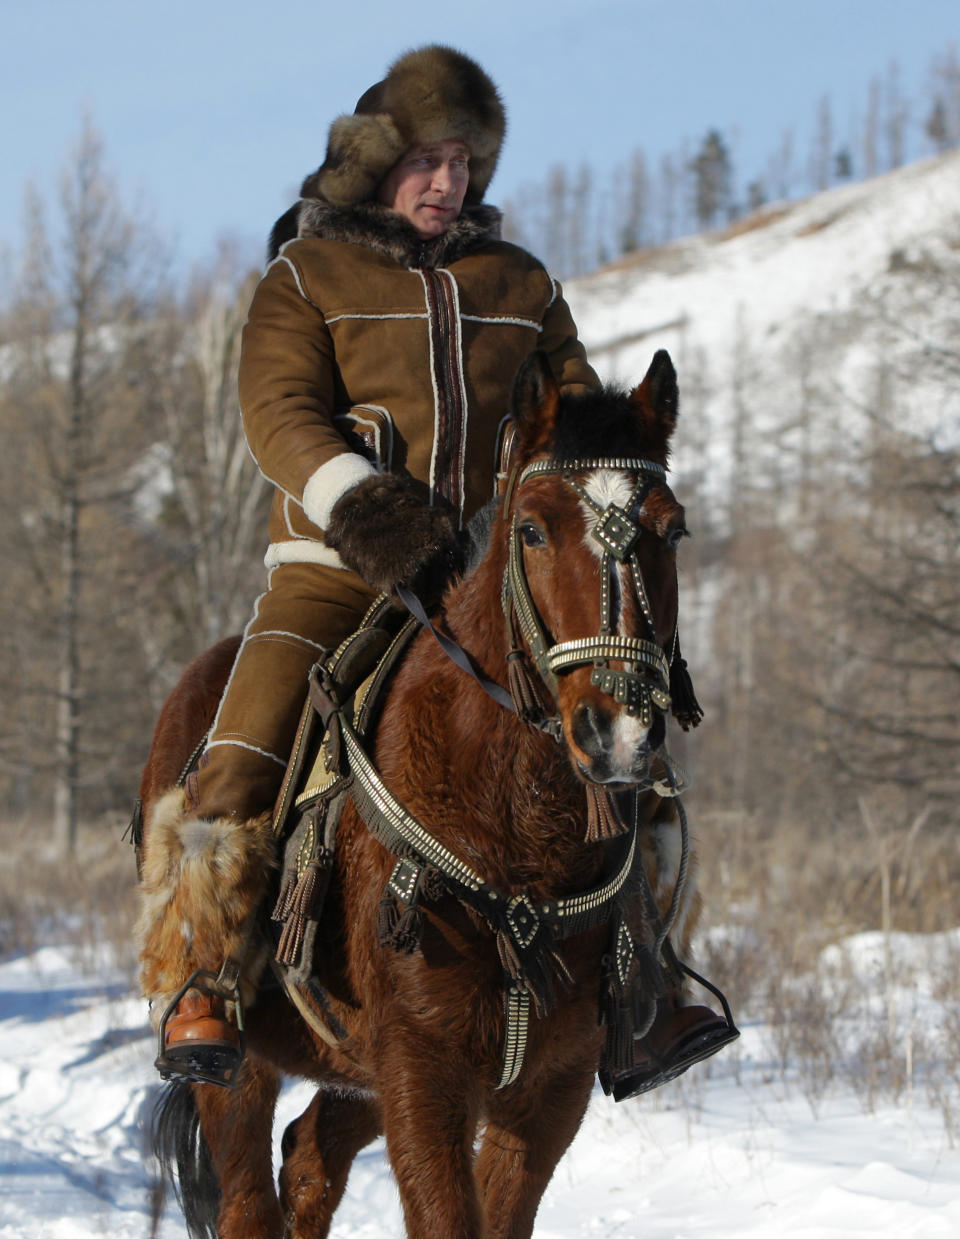 Putin rides a horse in the Karatash foothills in Siberia, Russia, on Feb. 25, 2010.